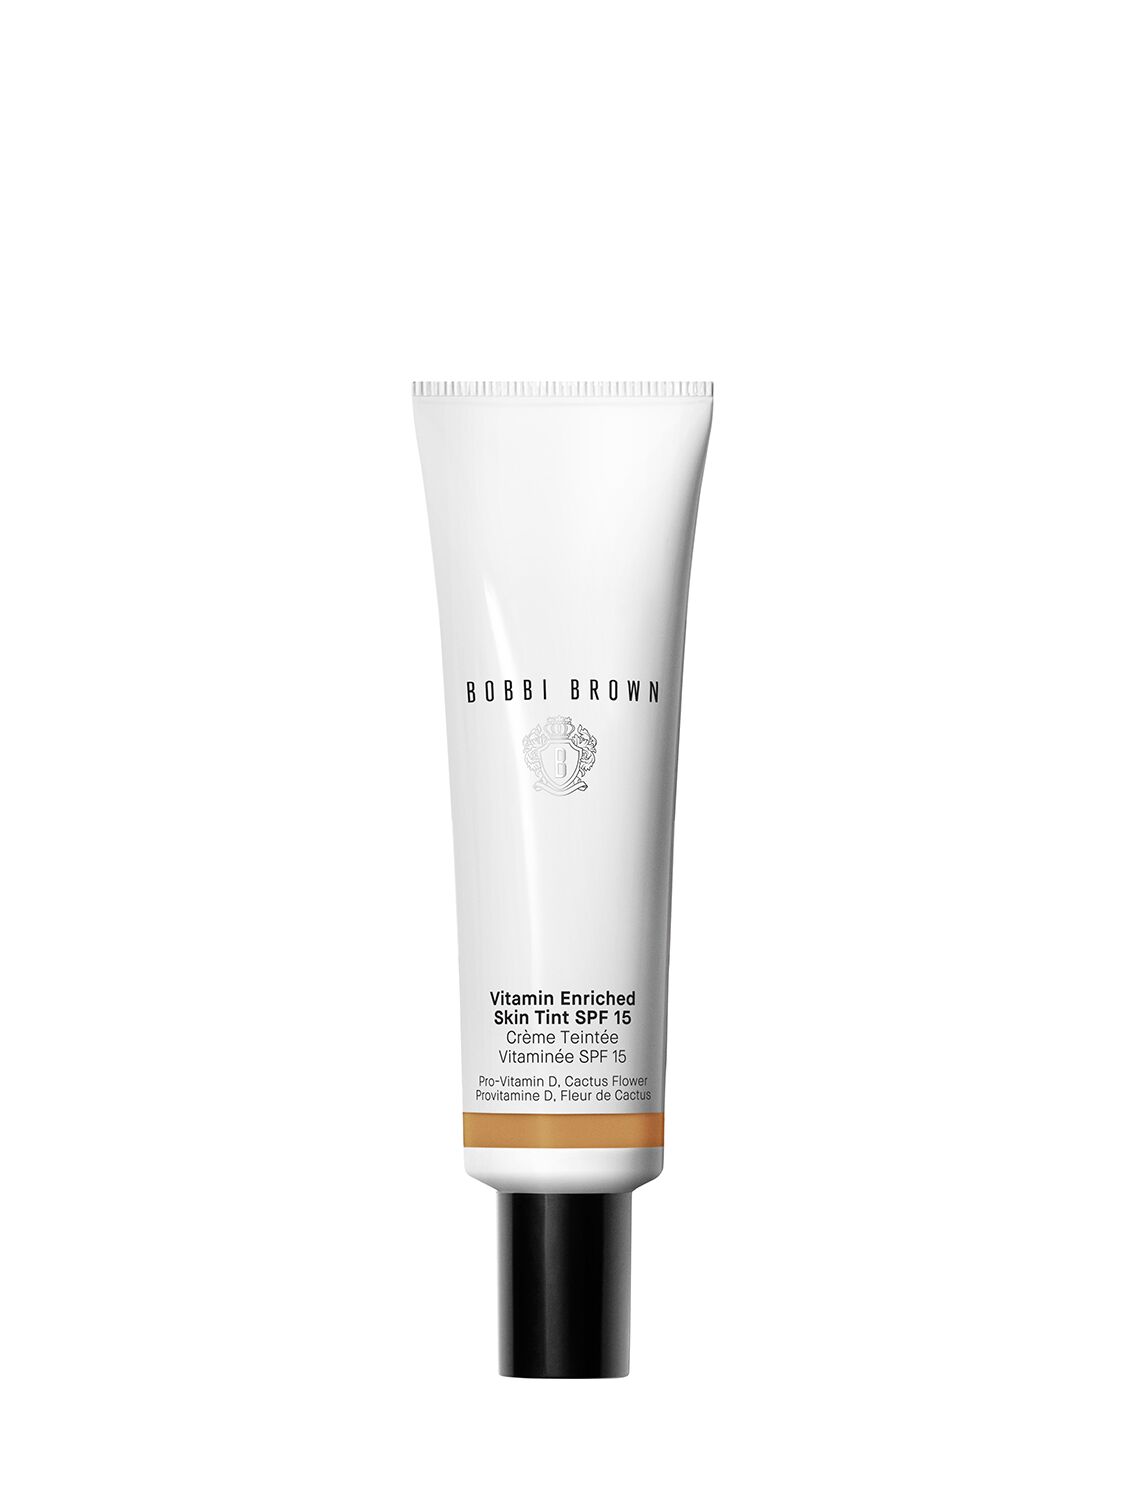 Image of 50ml Vitamin Enriched Skin Tint